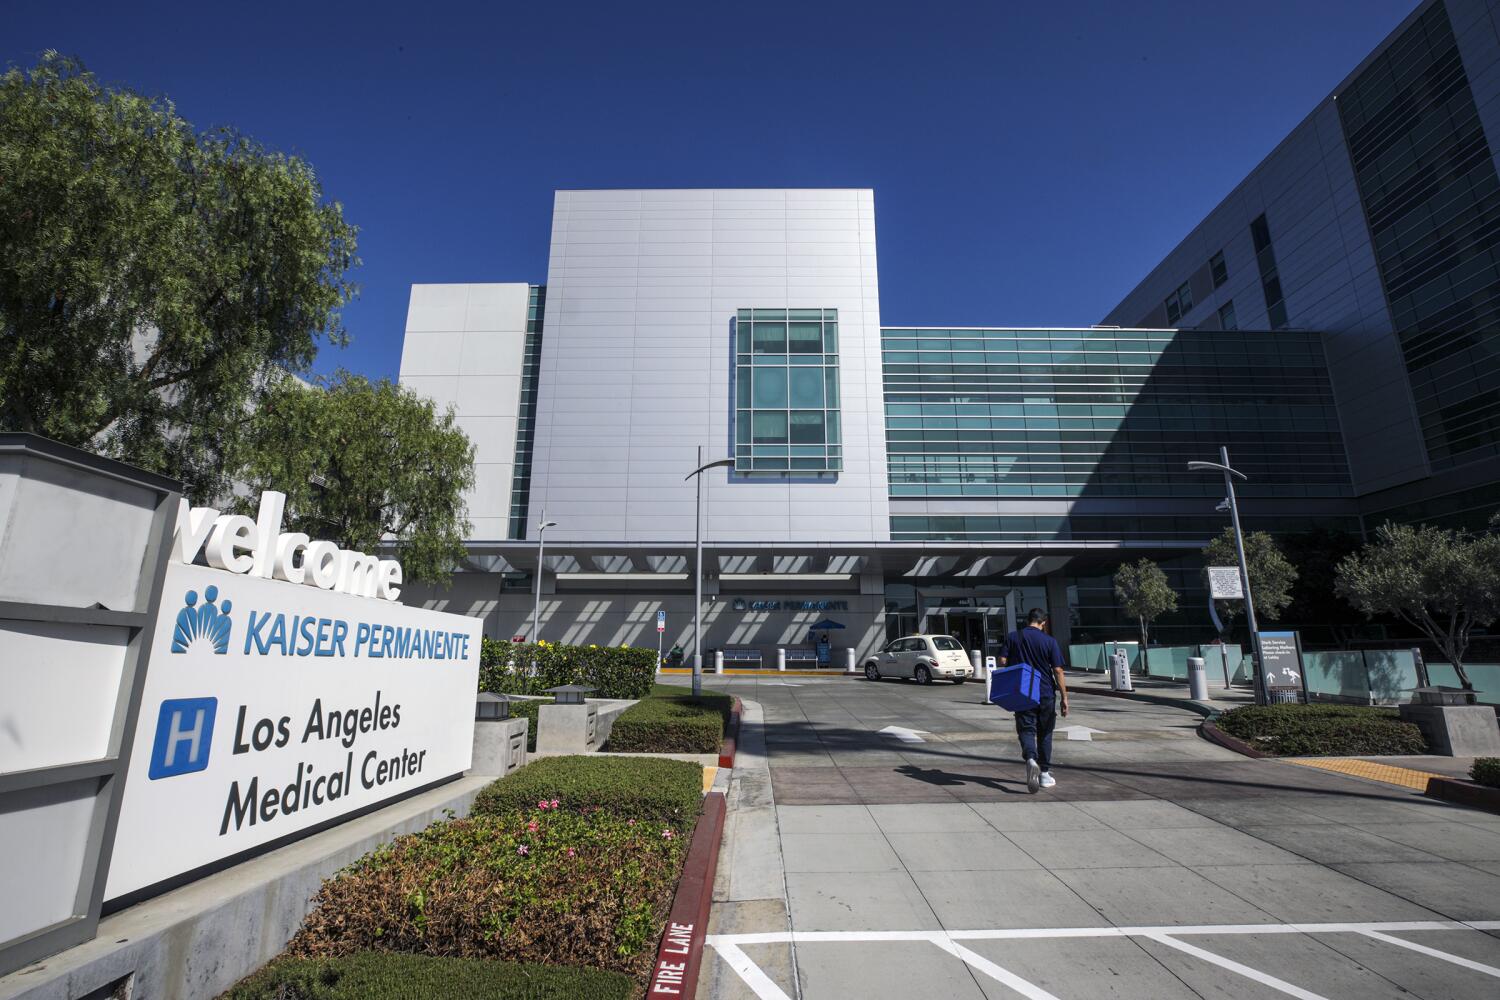 Kaiser Permanente notifies 13.4 million members of data breach. City of Hope also reported breach